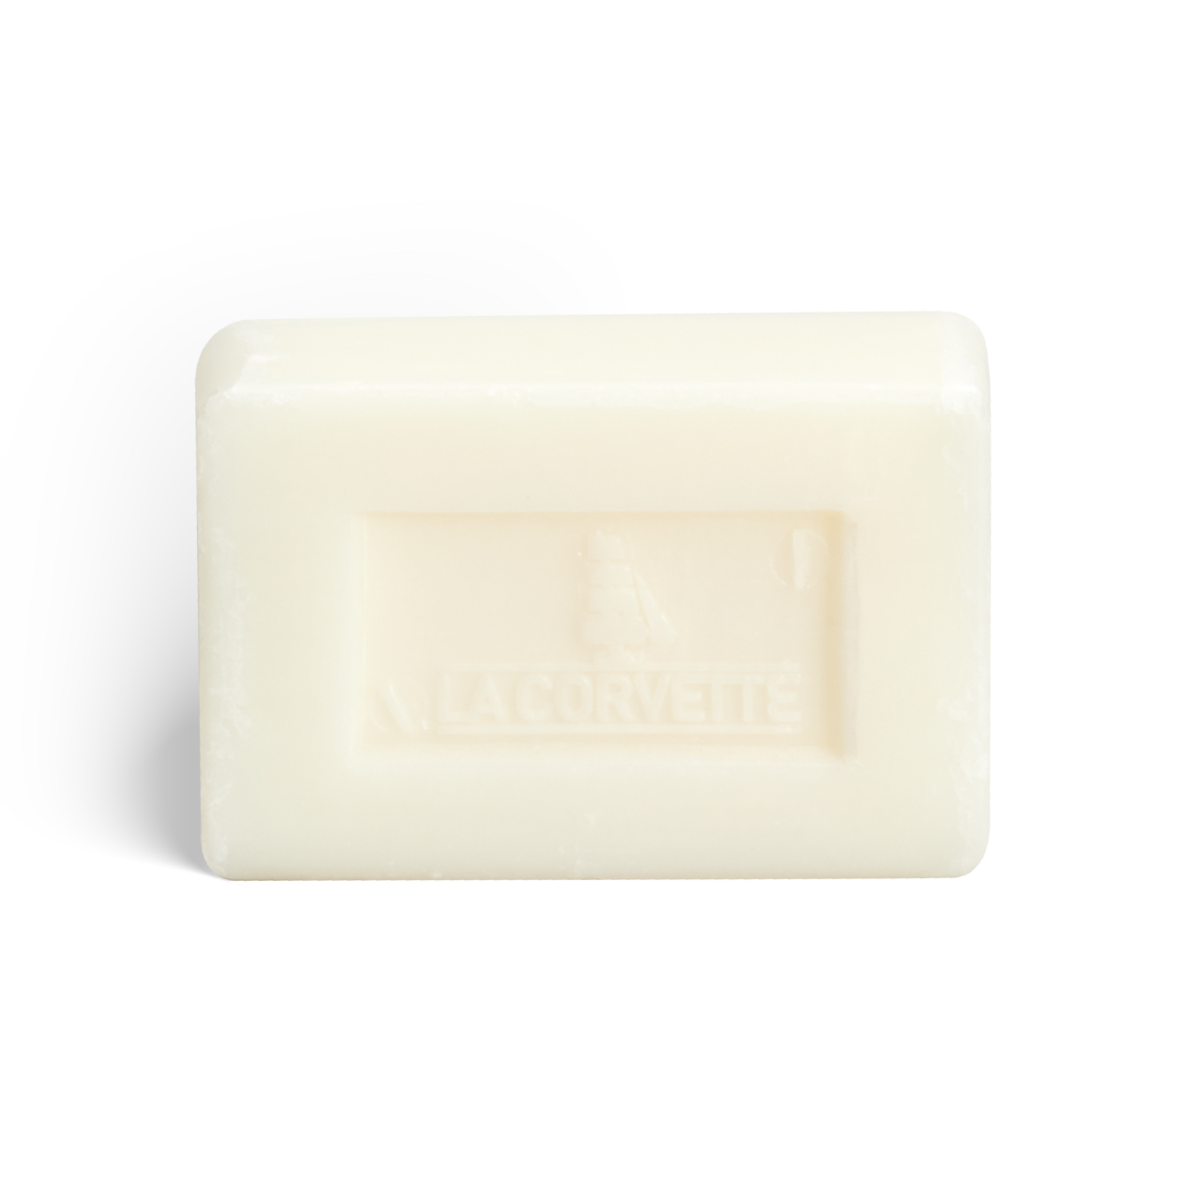 Provence goat's milk scented soap 100g